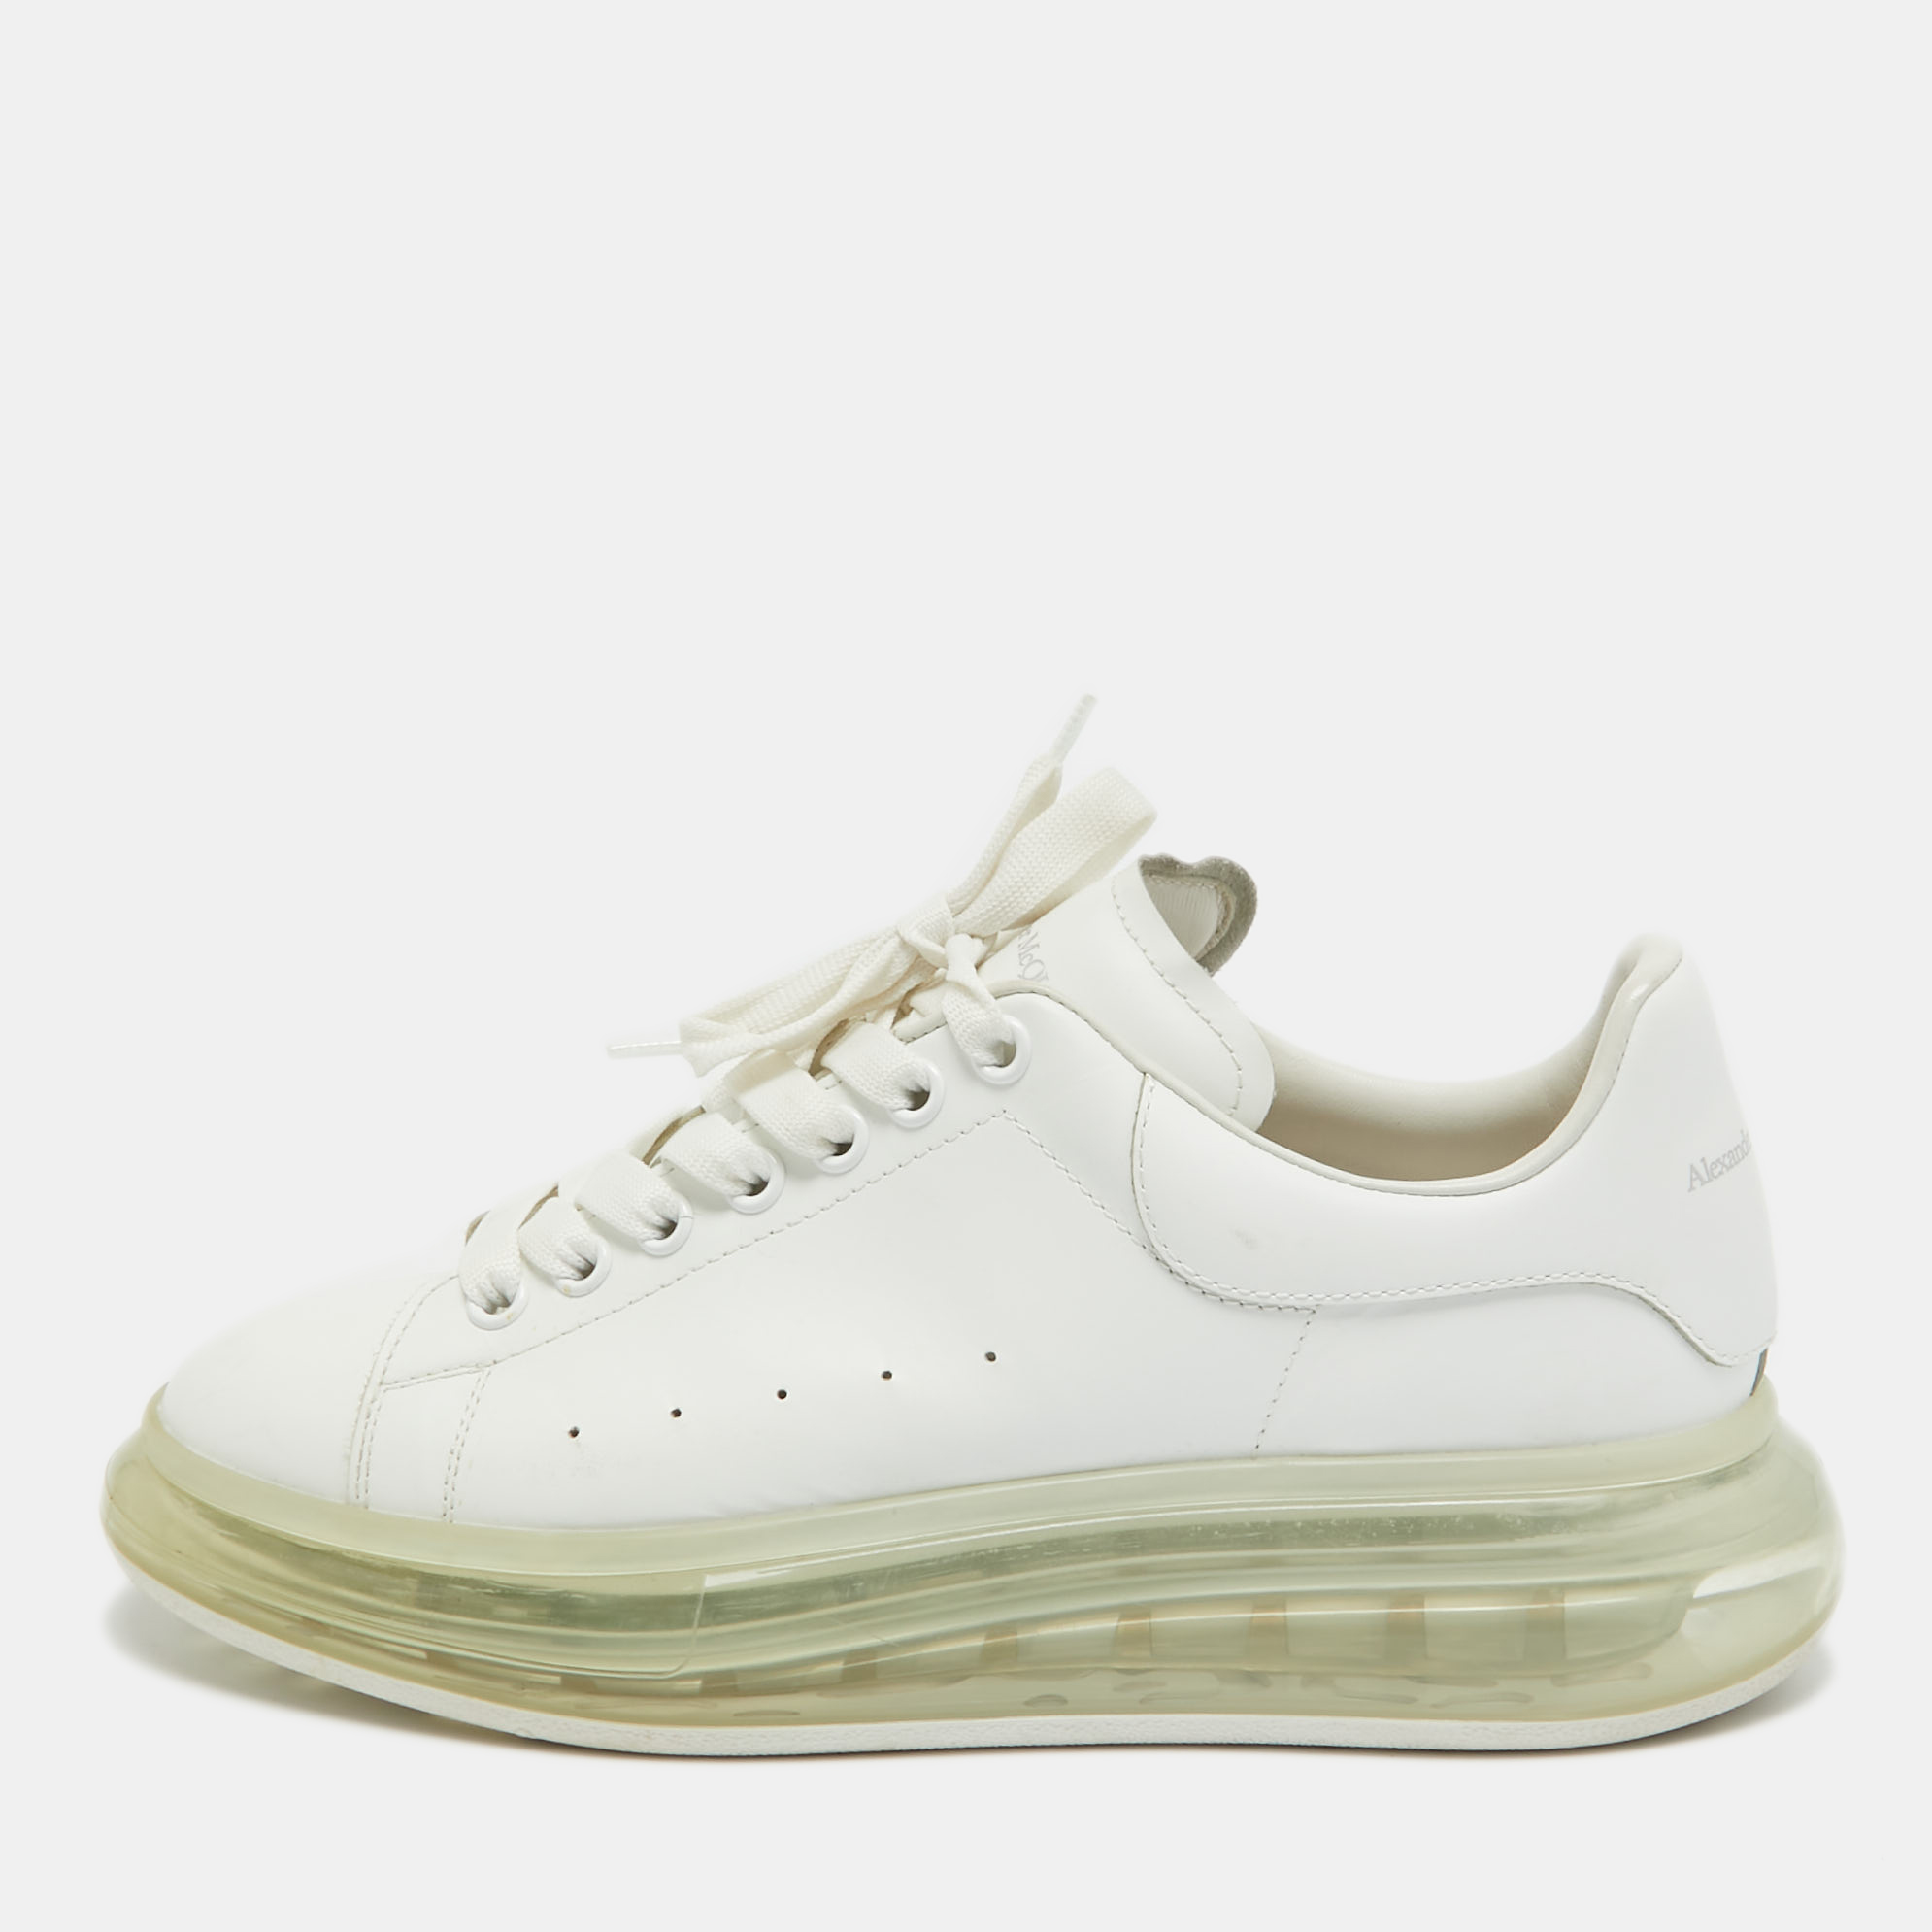 Pre-owned Alexander Mcqueen White Leather Oversized Transparent Sole Sneakers Size 42.5